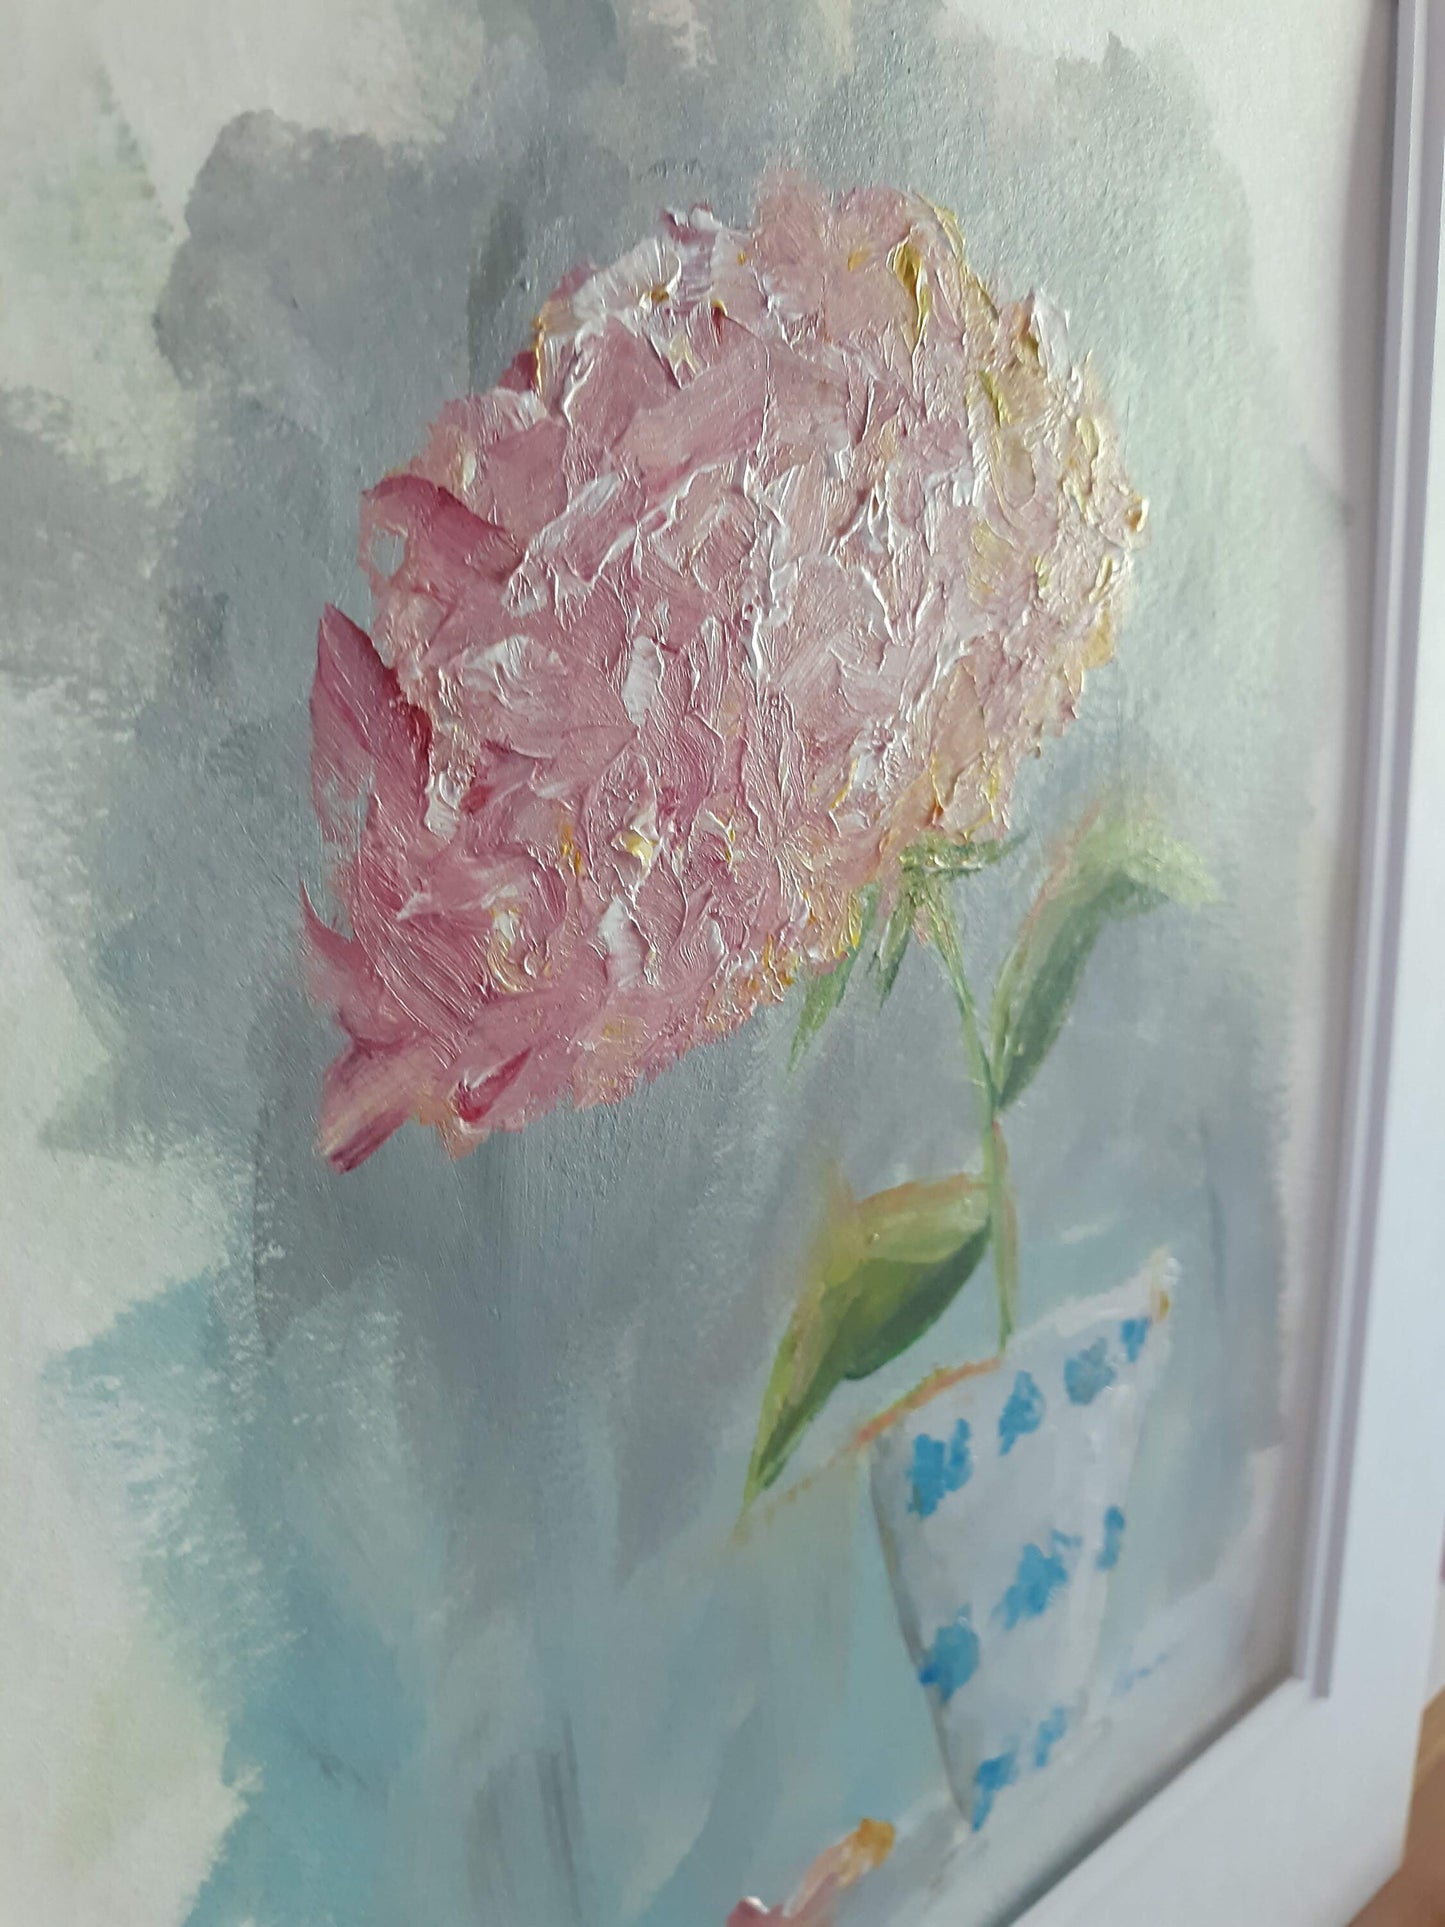 Not a Peony, Flower in Vase Painting